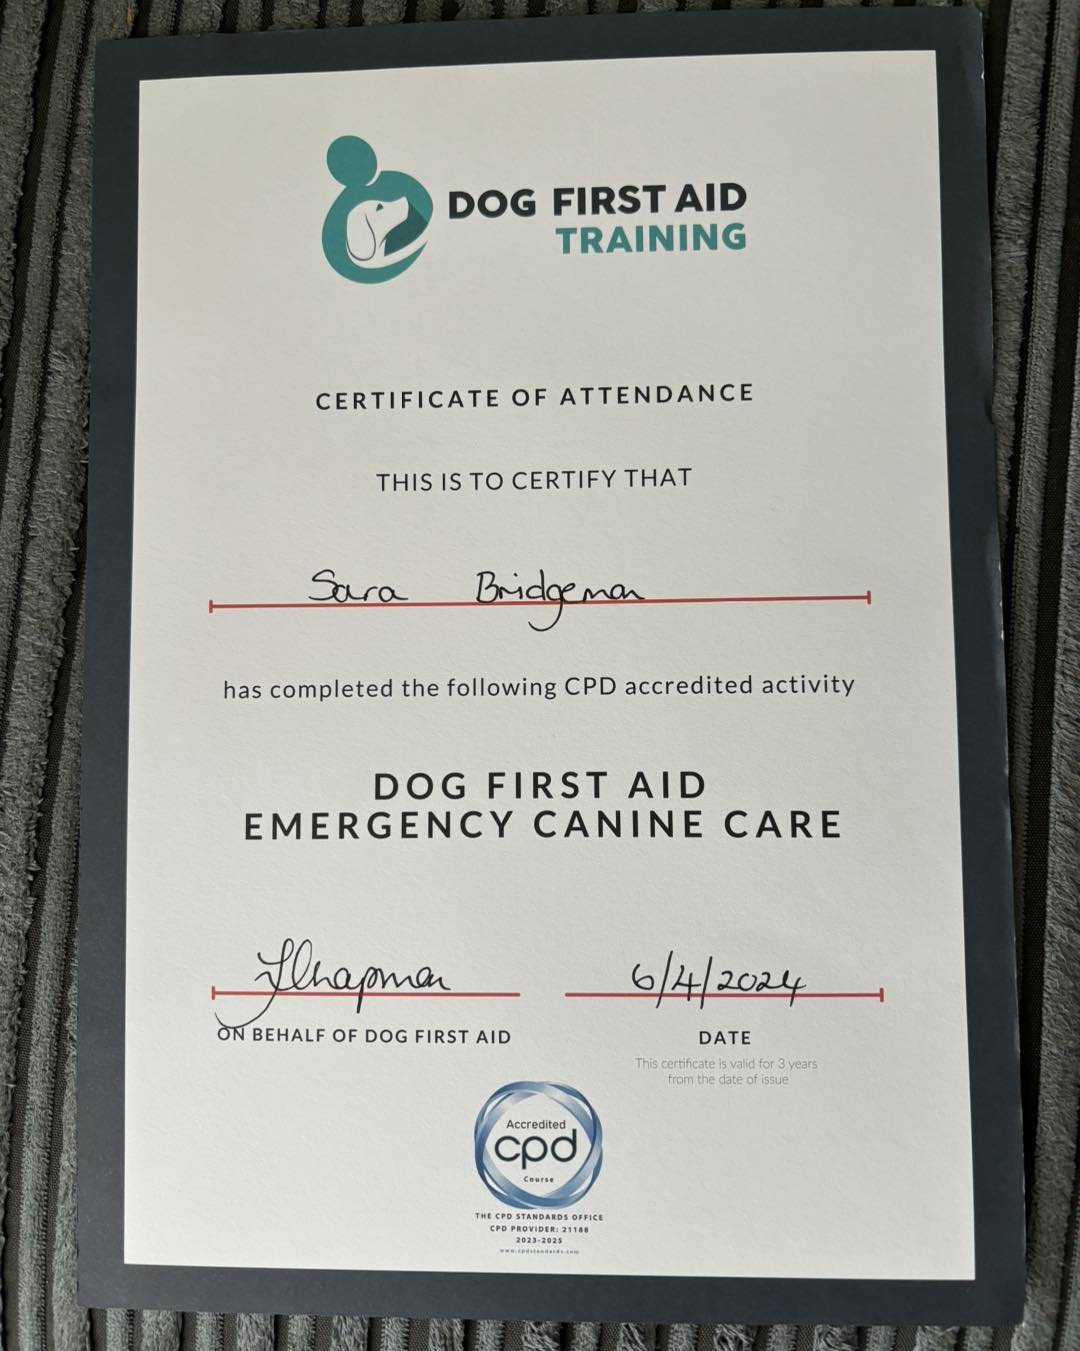 Always lovely to learn new things and my Canine First Aid course was brilliant. I&rsquo;m now covered for another couple of years.